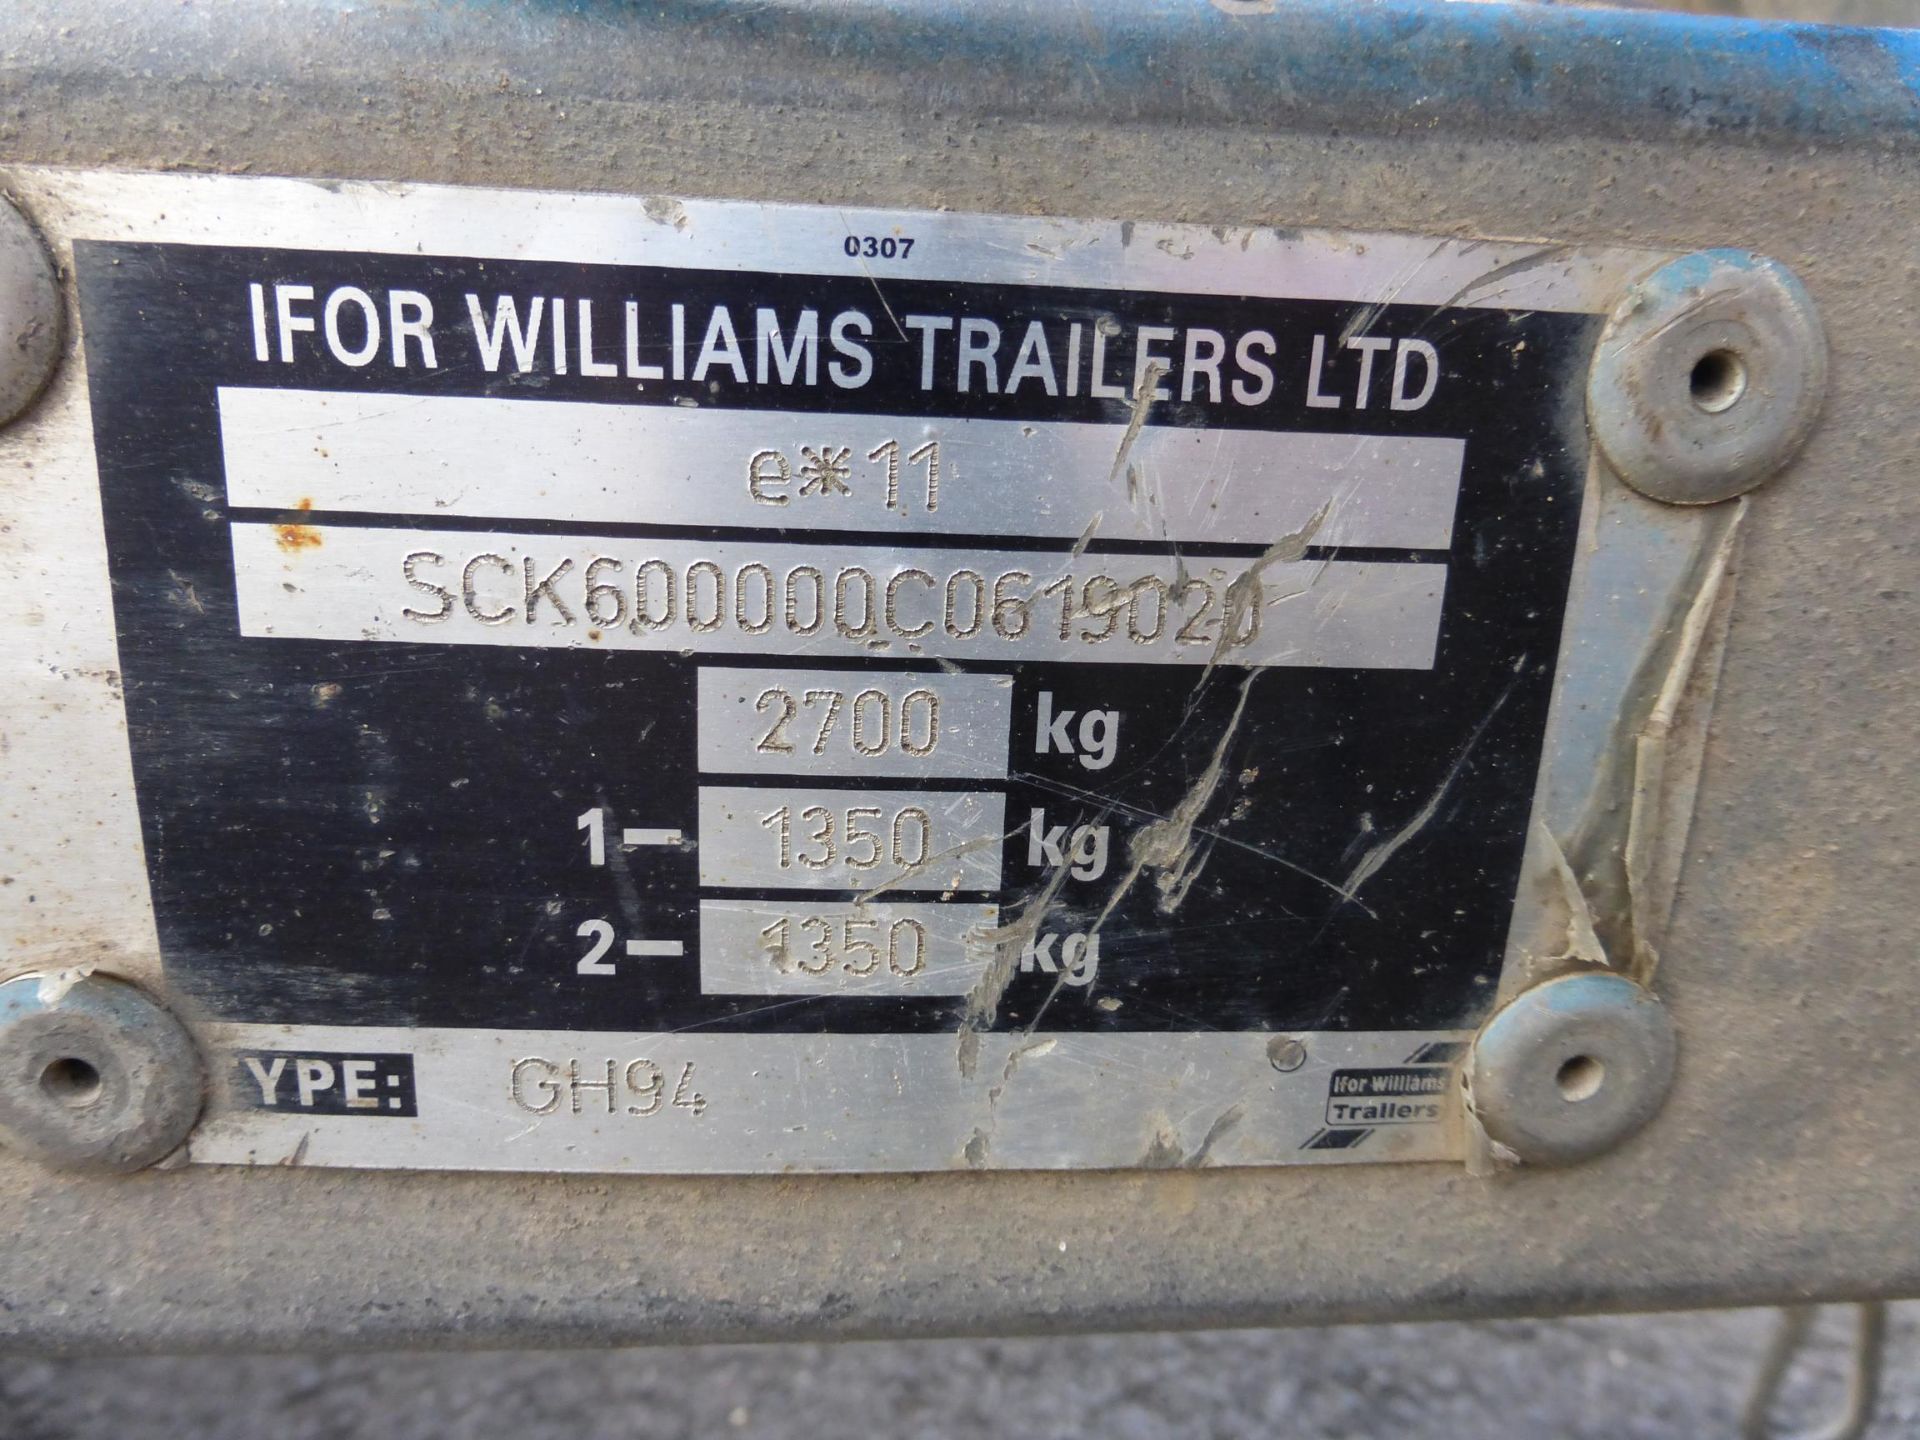 Ifor Williams 2013 Type DB56 GH94 Galvanised Twin Axle Plant Trailer. Vin No: SCK600000C0619020, - Image 9 of 10